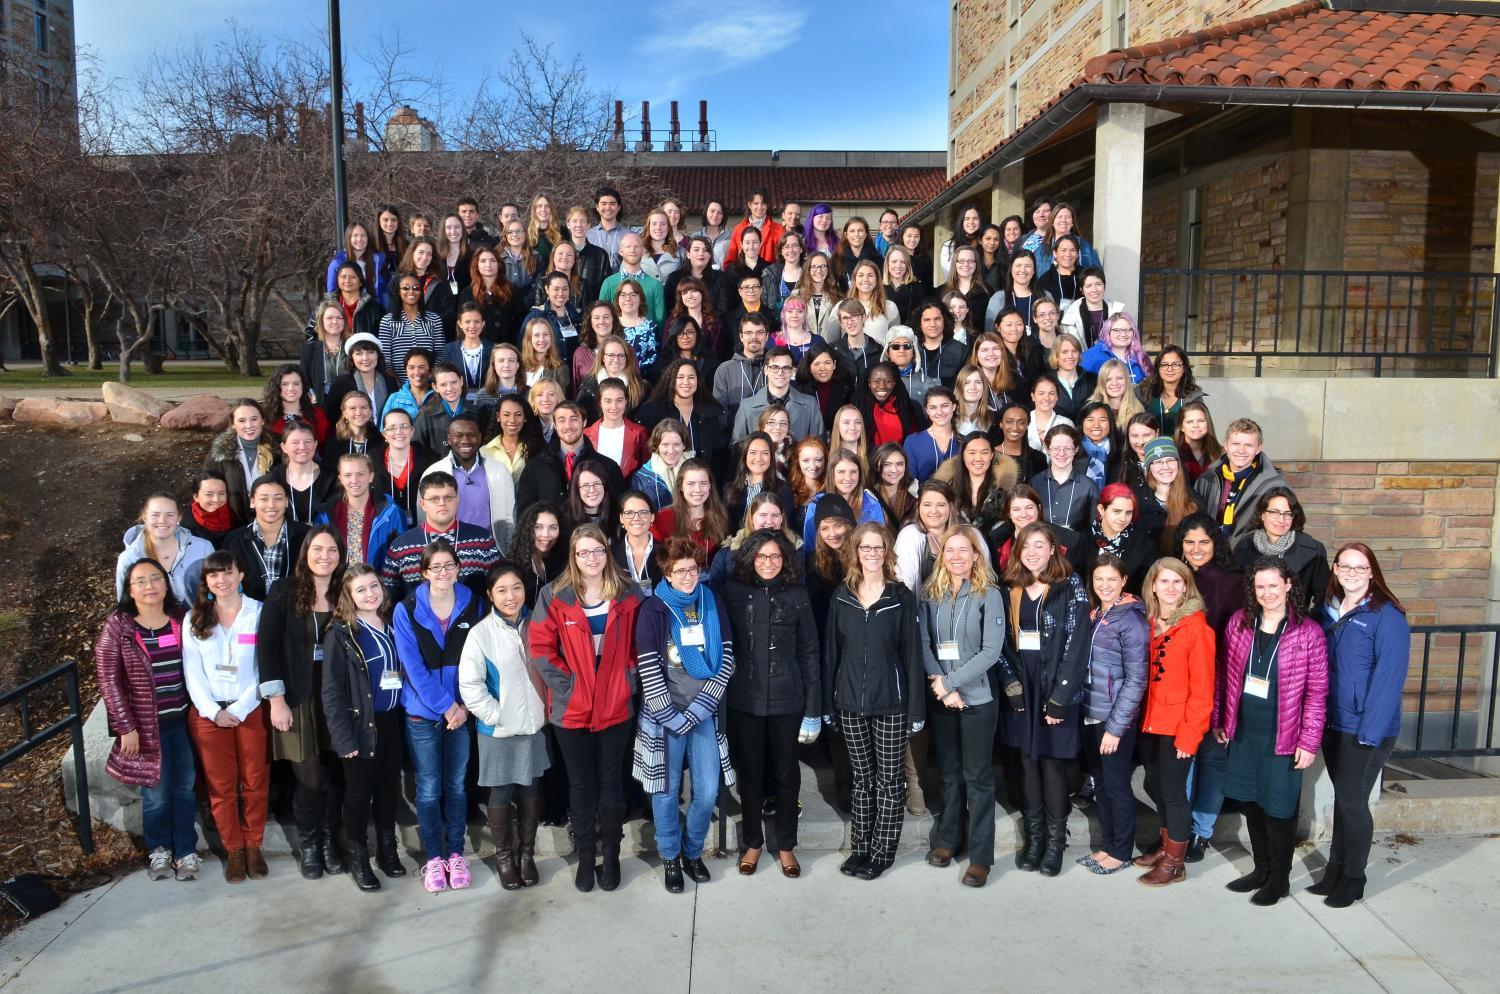 Group photo of 2017 Boulder CUWiP attendees oustide Duane Physics